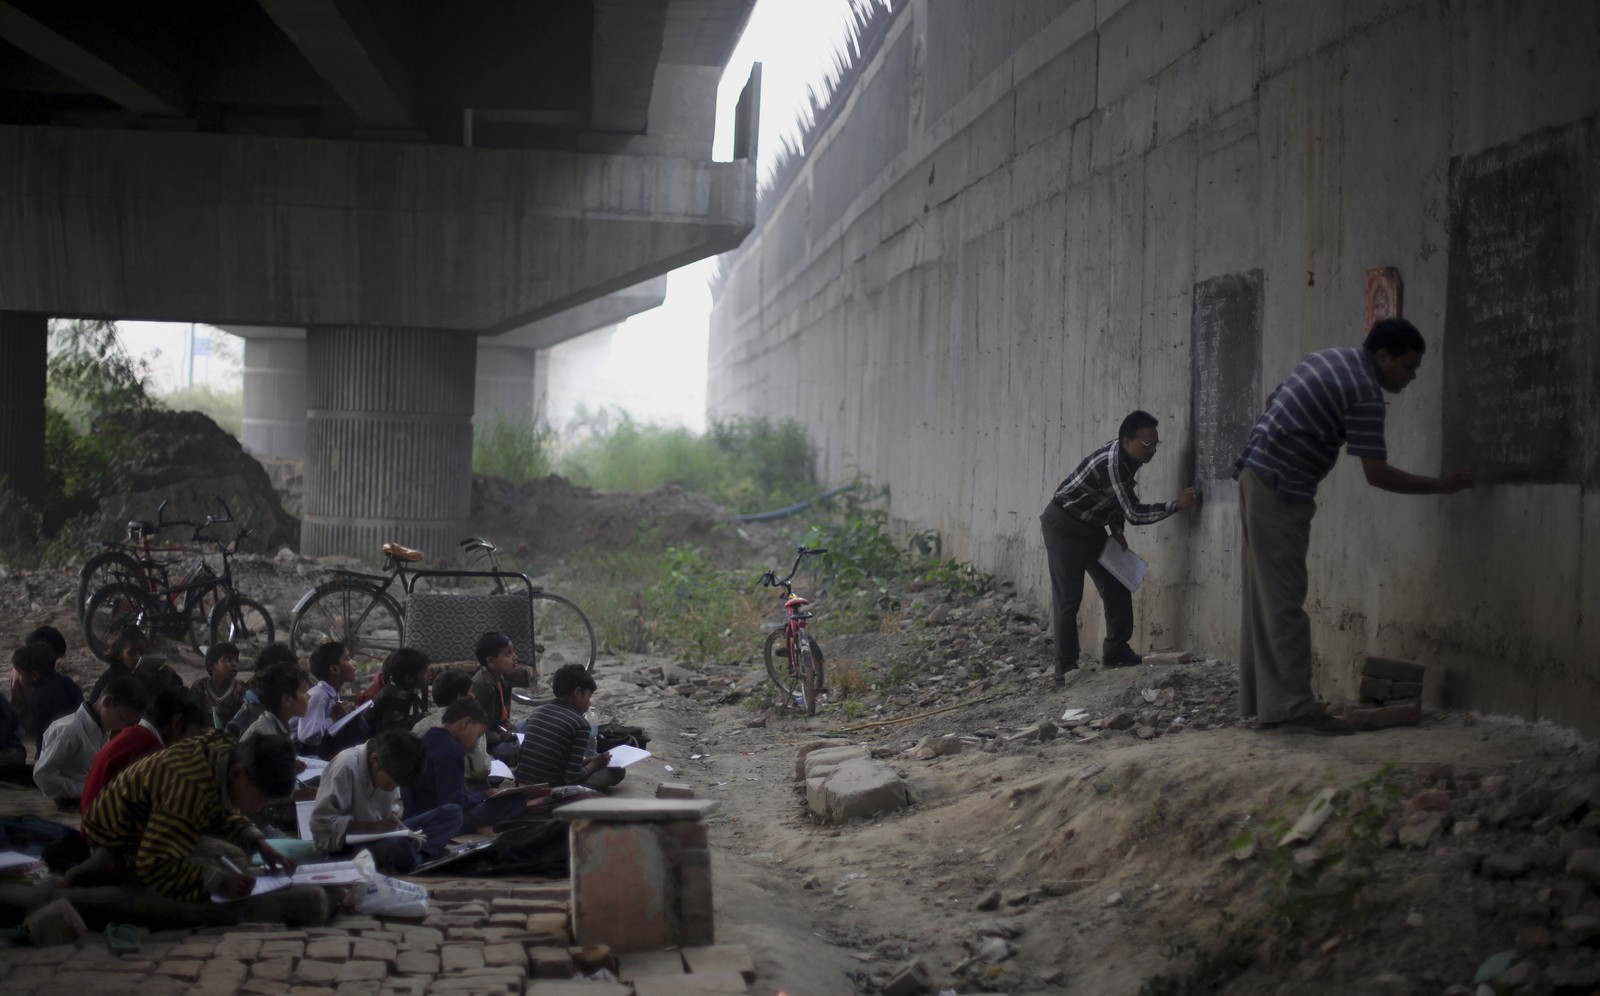 Teachers in India gave lessons to homeless children